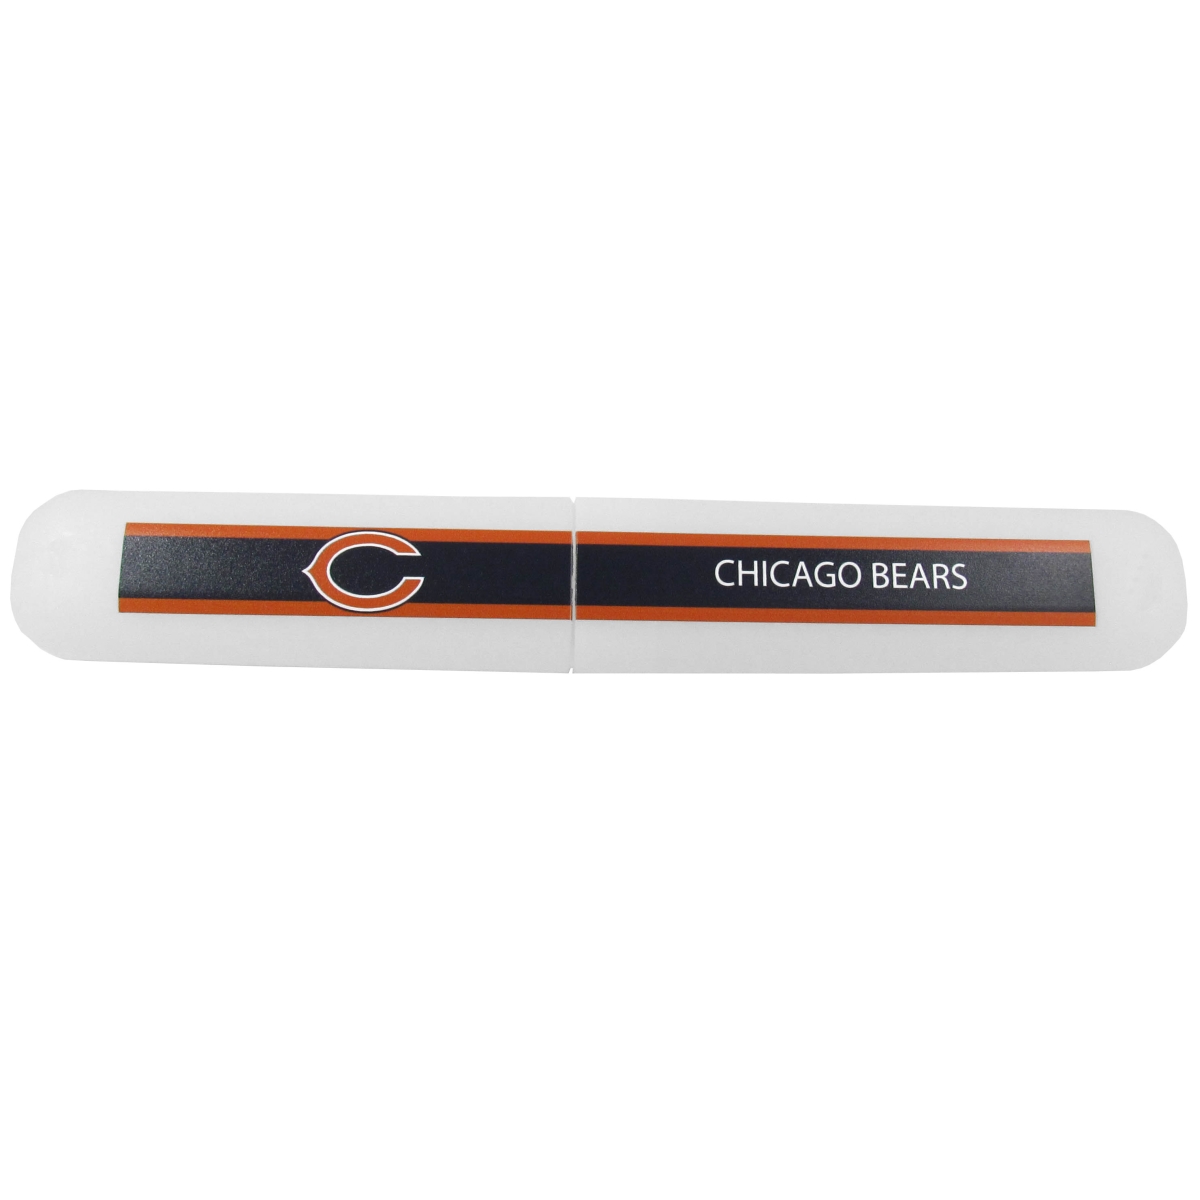 Picture of Siskiyou FTBC005 Unisex NFL Chicago Bears Travel Toothbrush Case - One Size